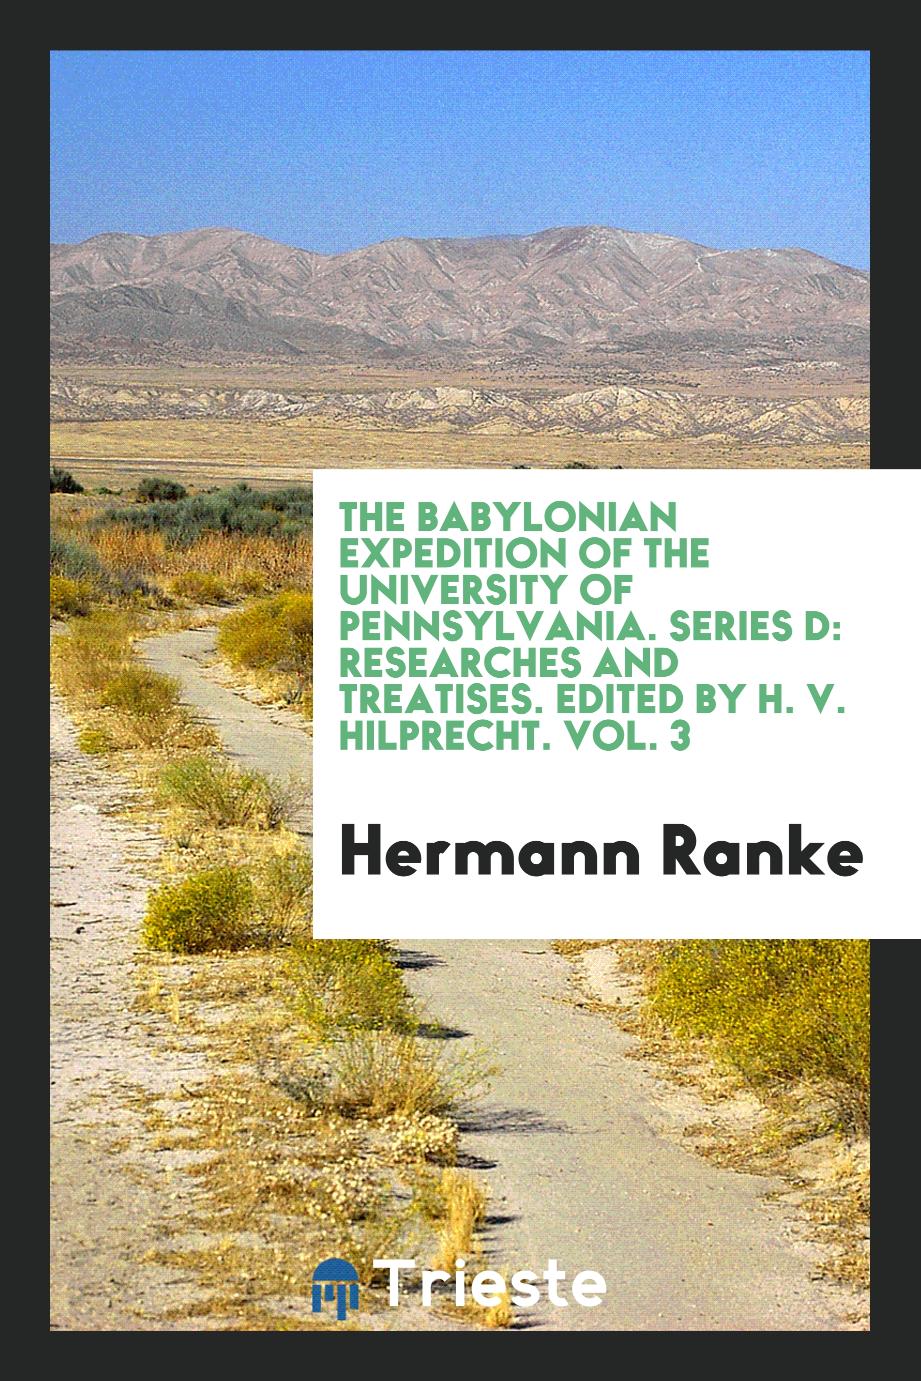 The Babylonian Expedition of the University of Pennsylvania. Series D: Researches and treatises. Edited by H. V. Hilprecht. Vol. 3